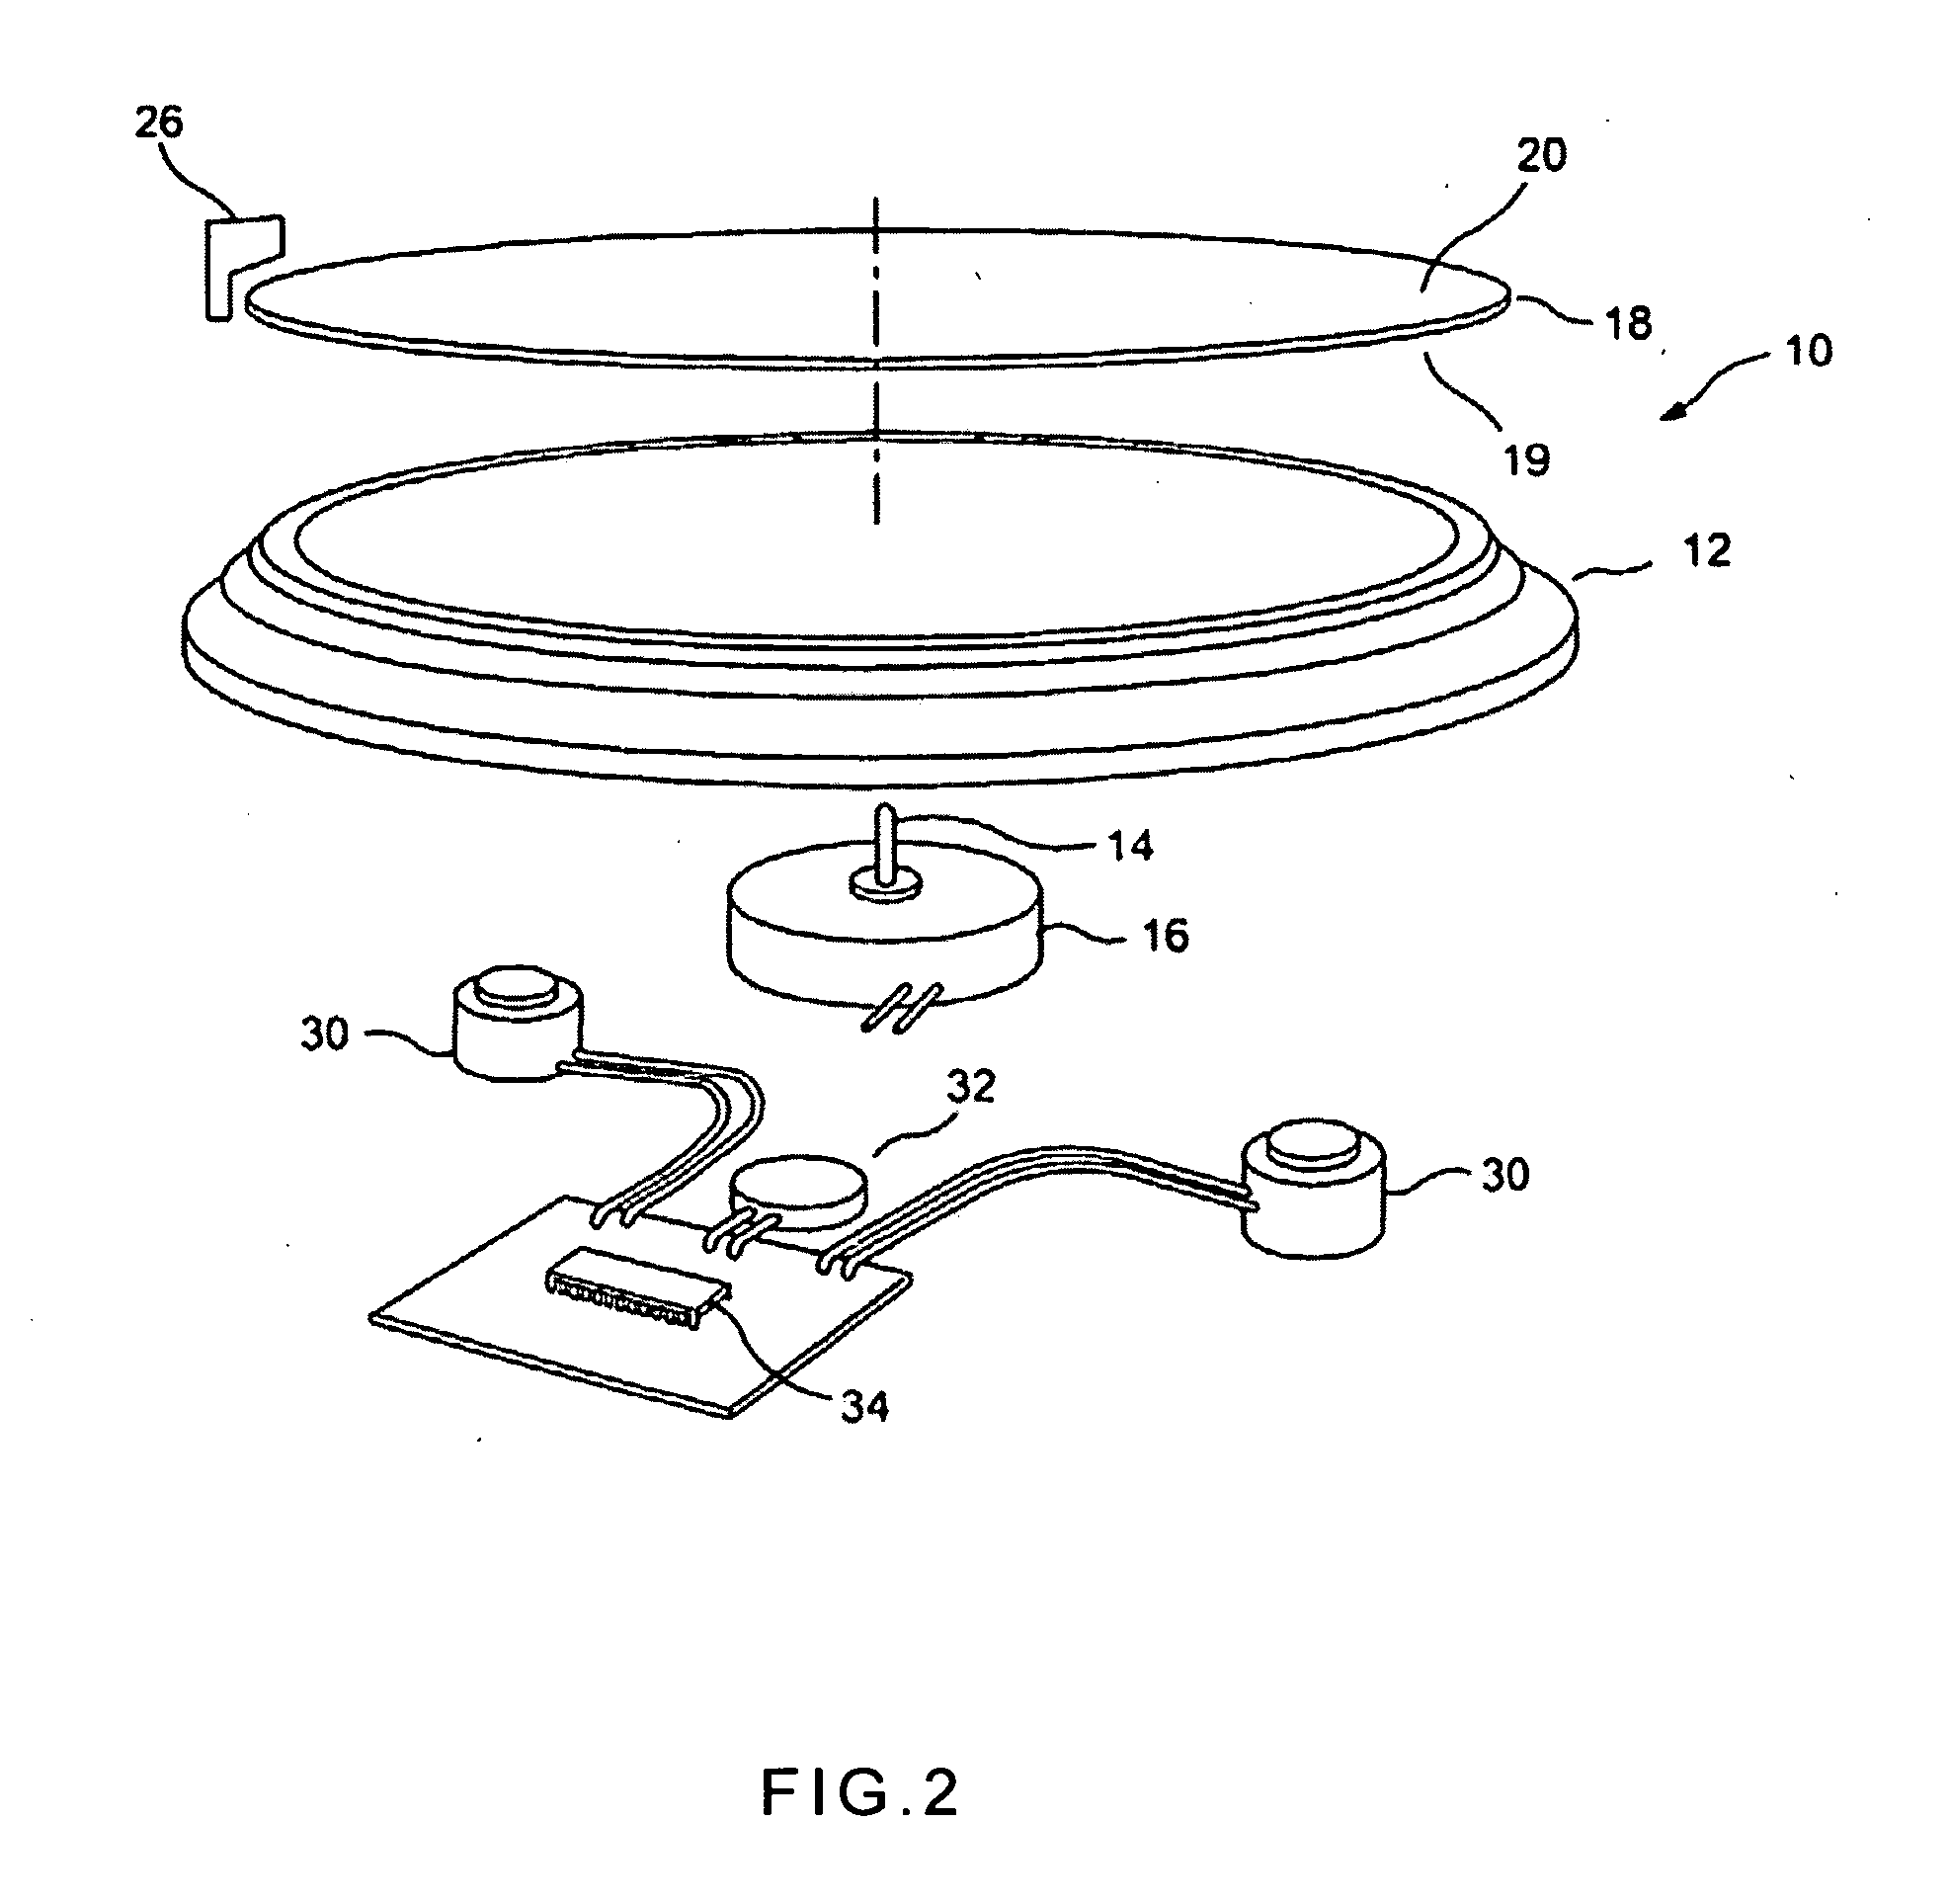 Variable slippage control for a disc jockey control surface